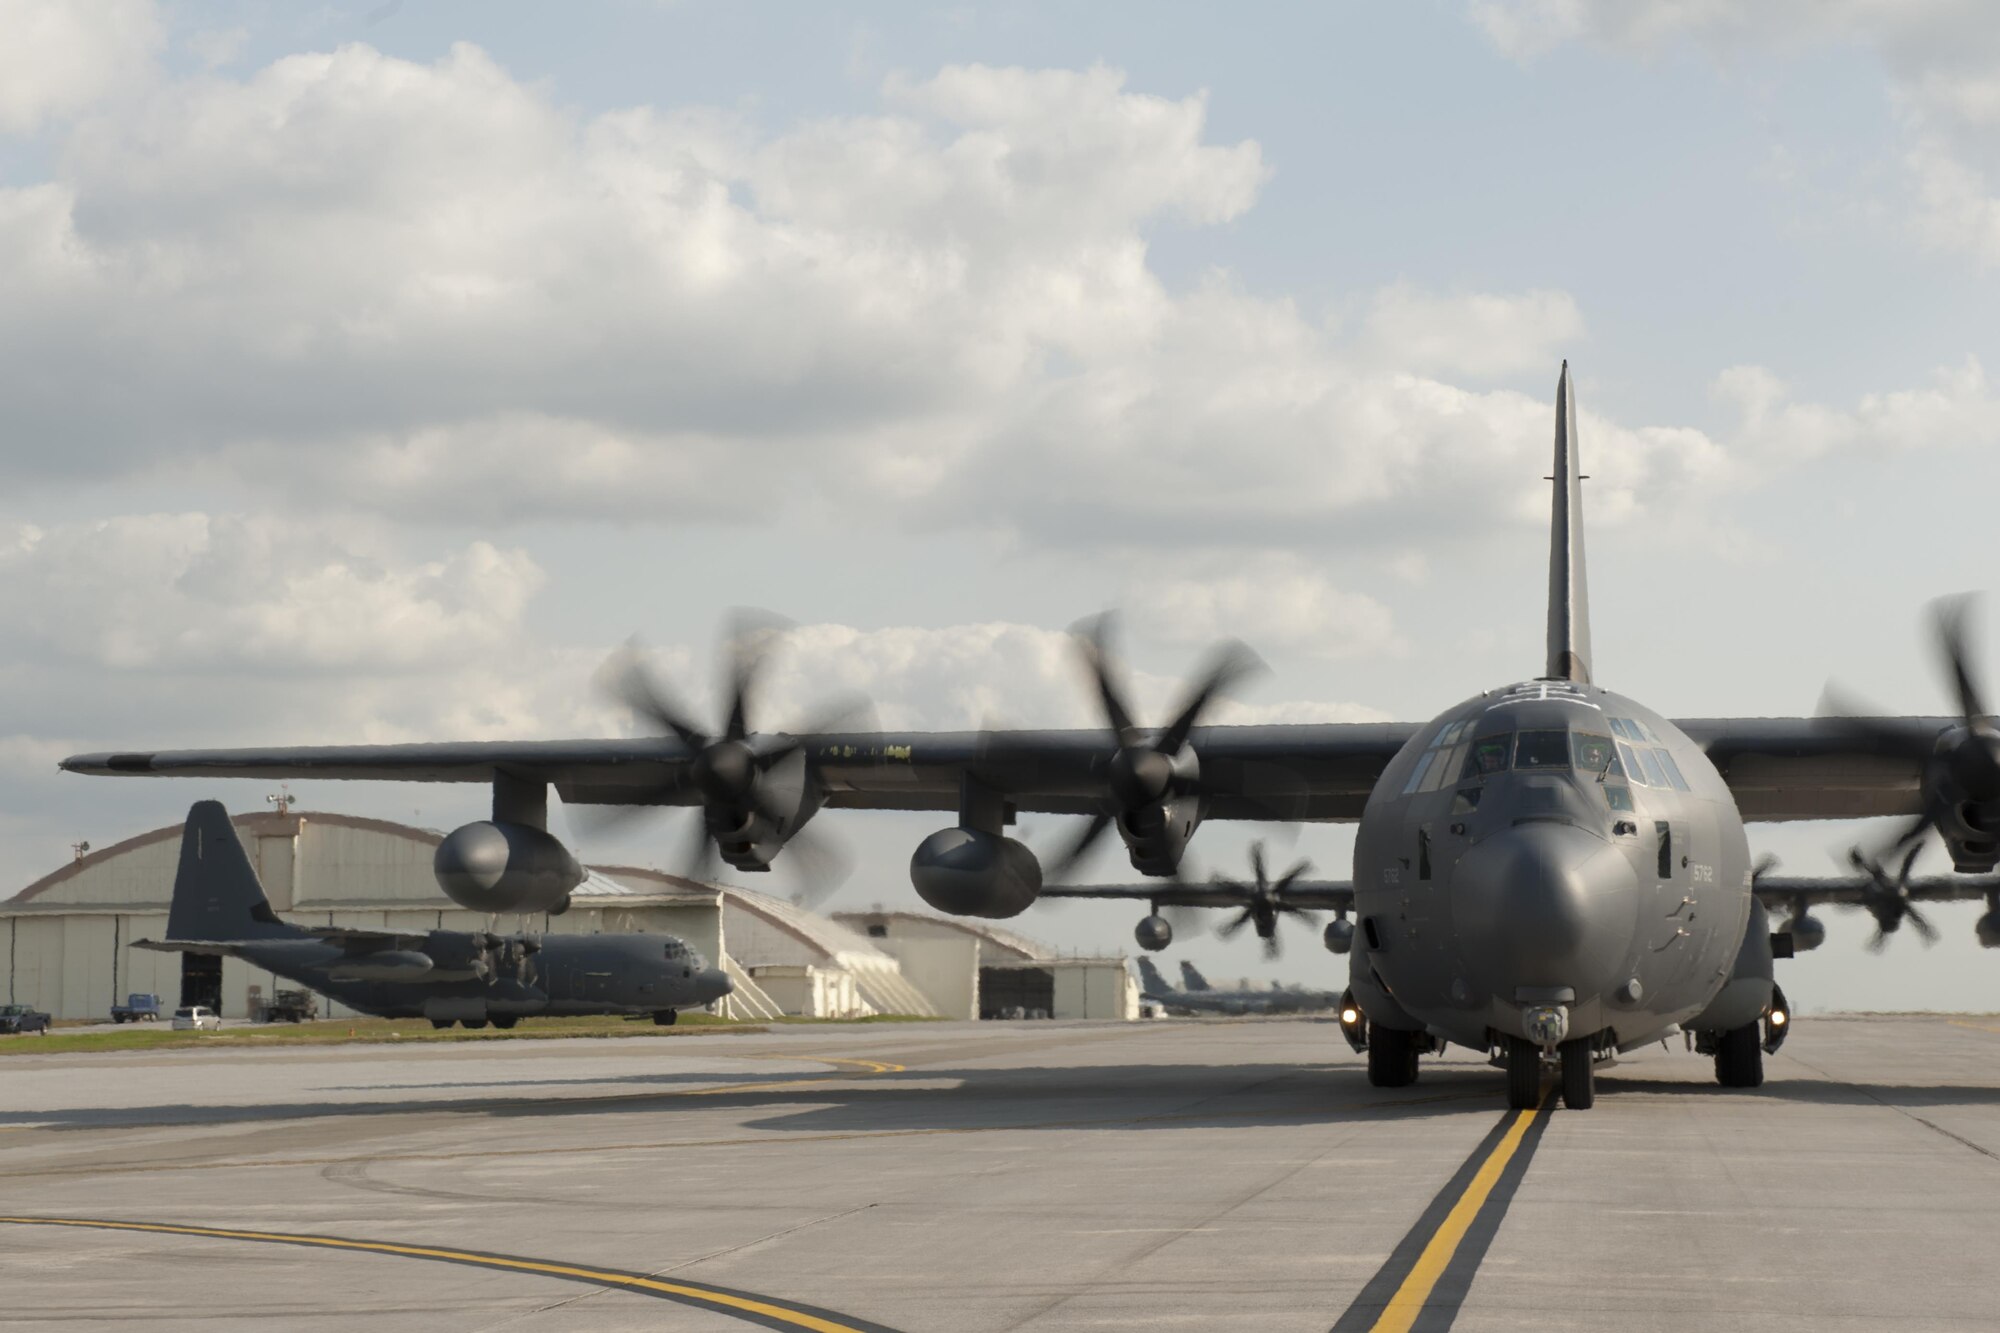 U.S. Air Force MC-130J Command IIs assigned to the 17th Special Operations Squadron taxi down the runway Feb. 17, 2016, at Kadena Air Base, Japan. The 17th SOS conducted a unit-wide training exercise which tasked the entire squadron with a quick-reaction, full-force sortie involving a five-ship formation flight, cargo drops, short runway landings and takeoffs, and helicopter air-to-air refueling. (U.S. Air Force photo by Senior Airman Peter Reft/Released)